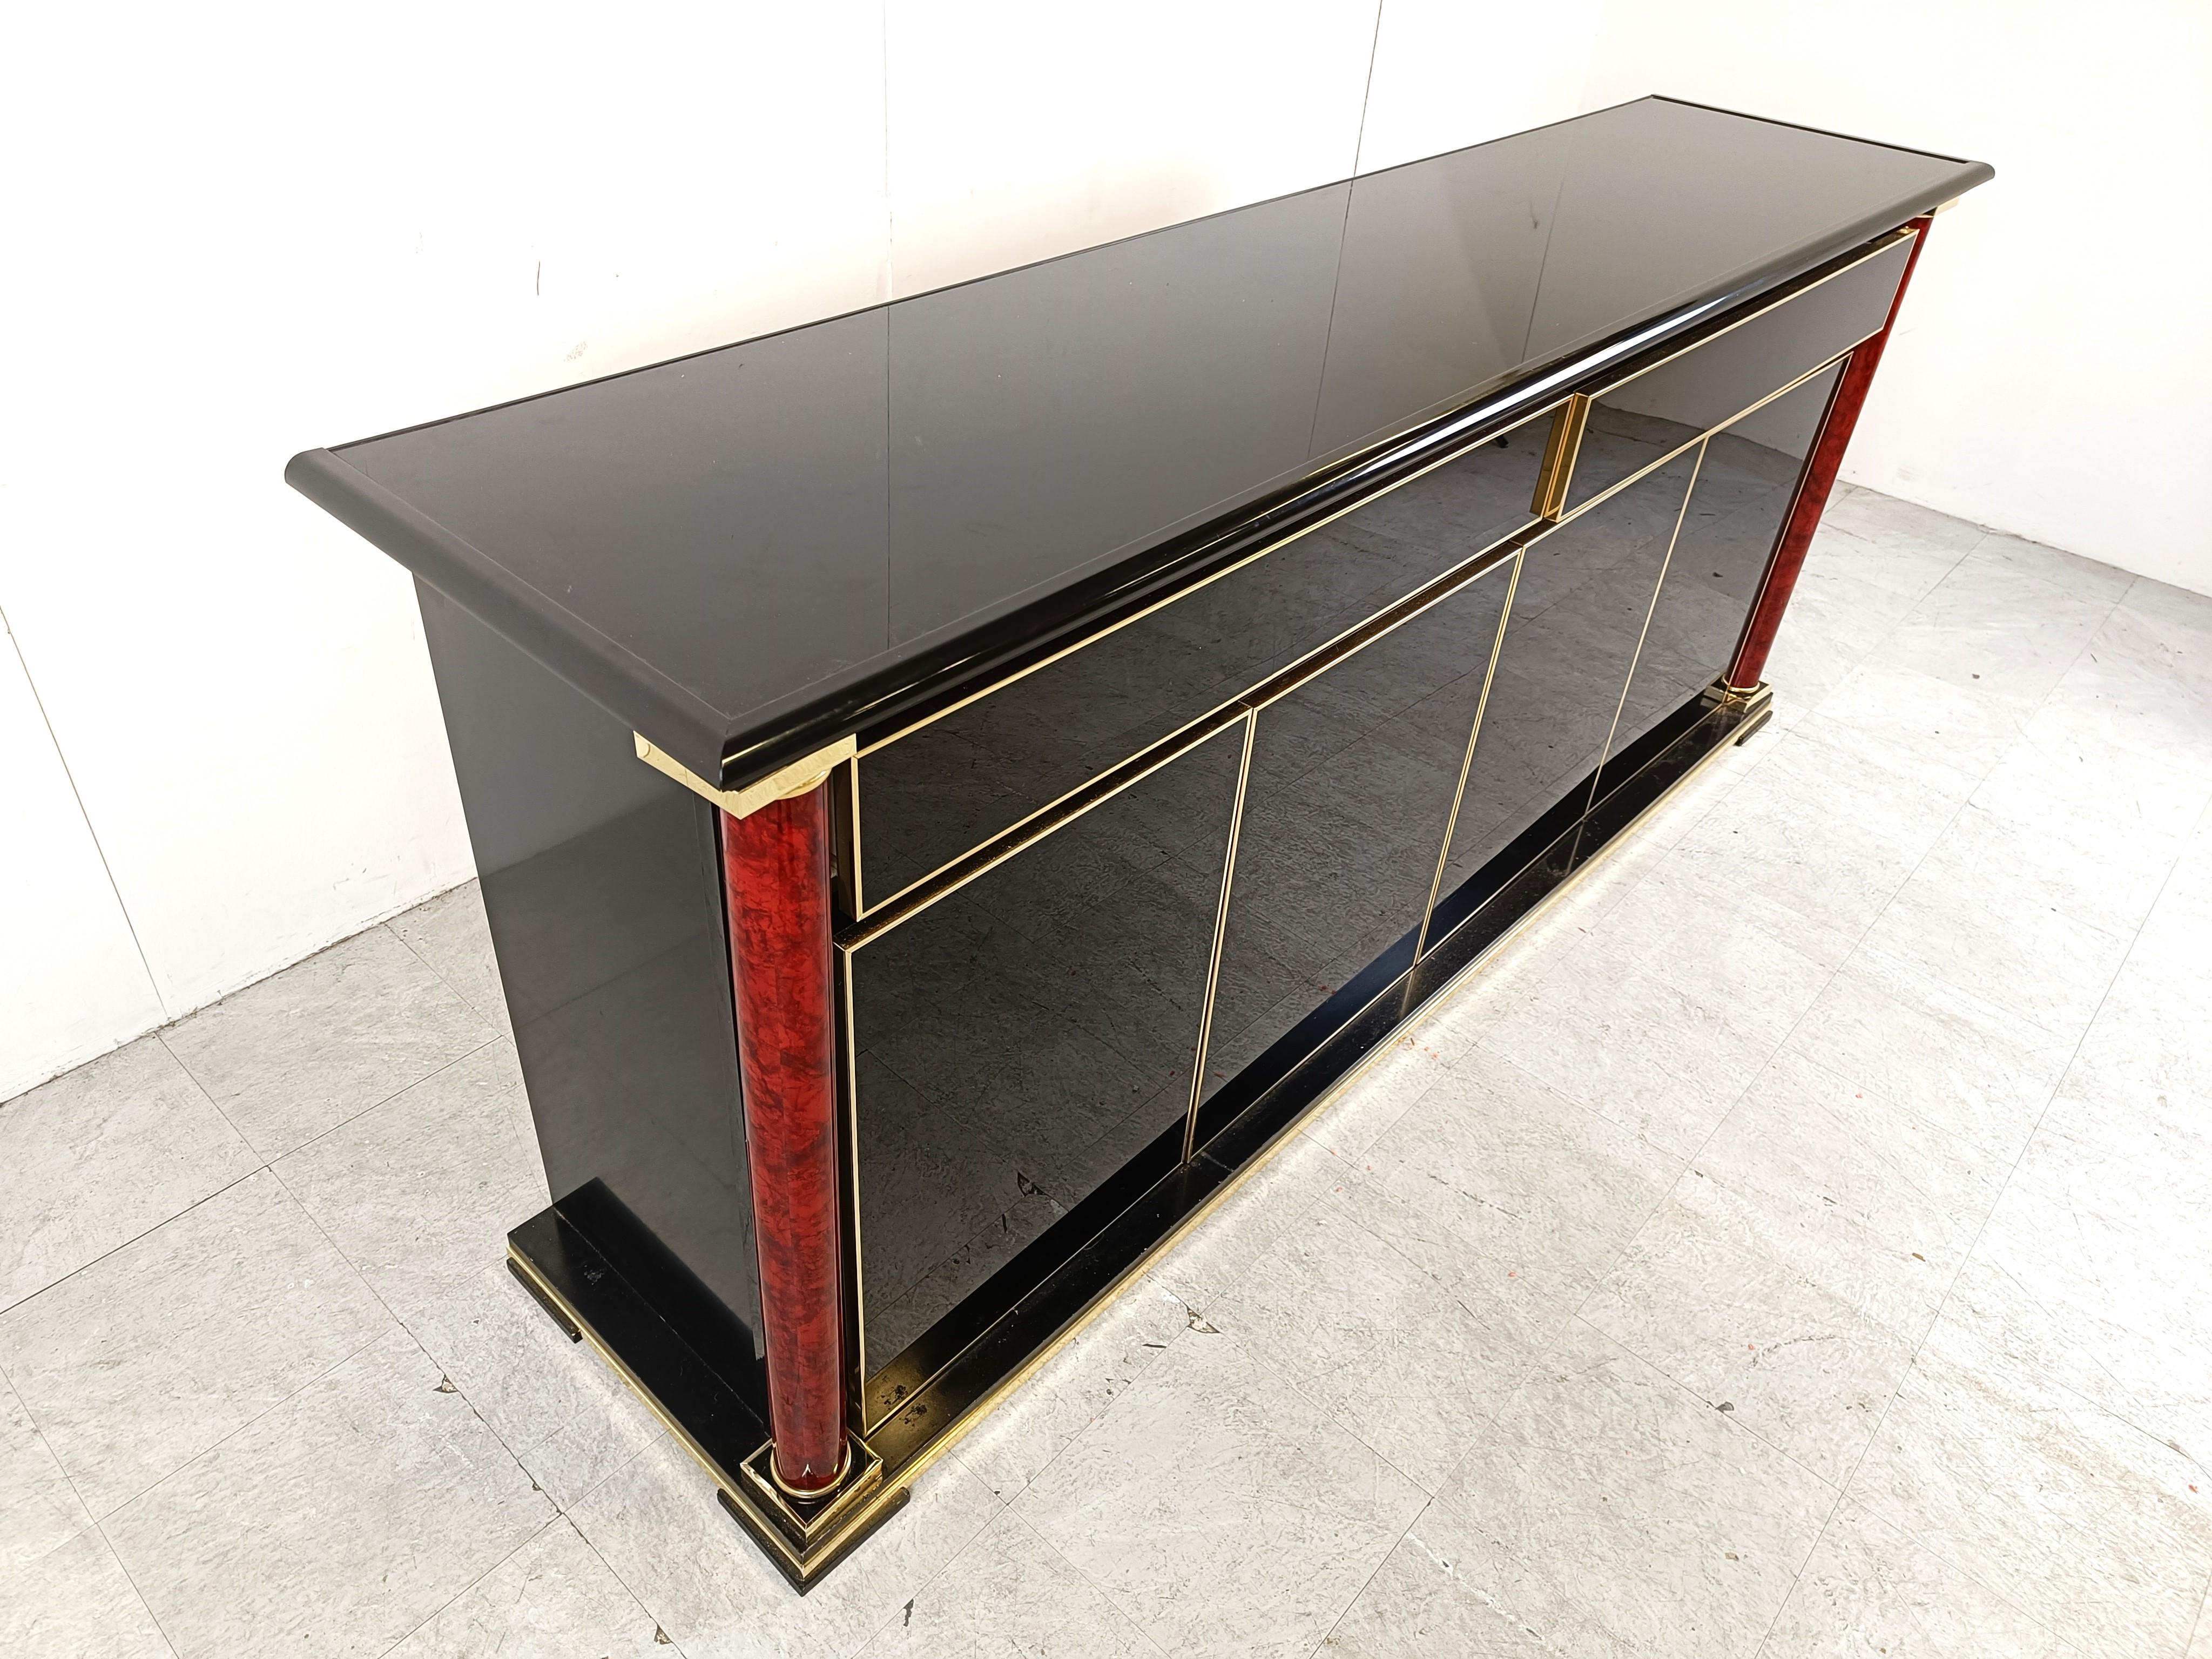 Luxurious seventies glamour sideboard made from black lacquer panels, brass decor and two wooden columns.

With 4 doors and 2 large drawers the sideboard offers plenty of storage space. 

The use of different high quality materials makes this piece